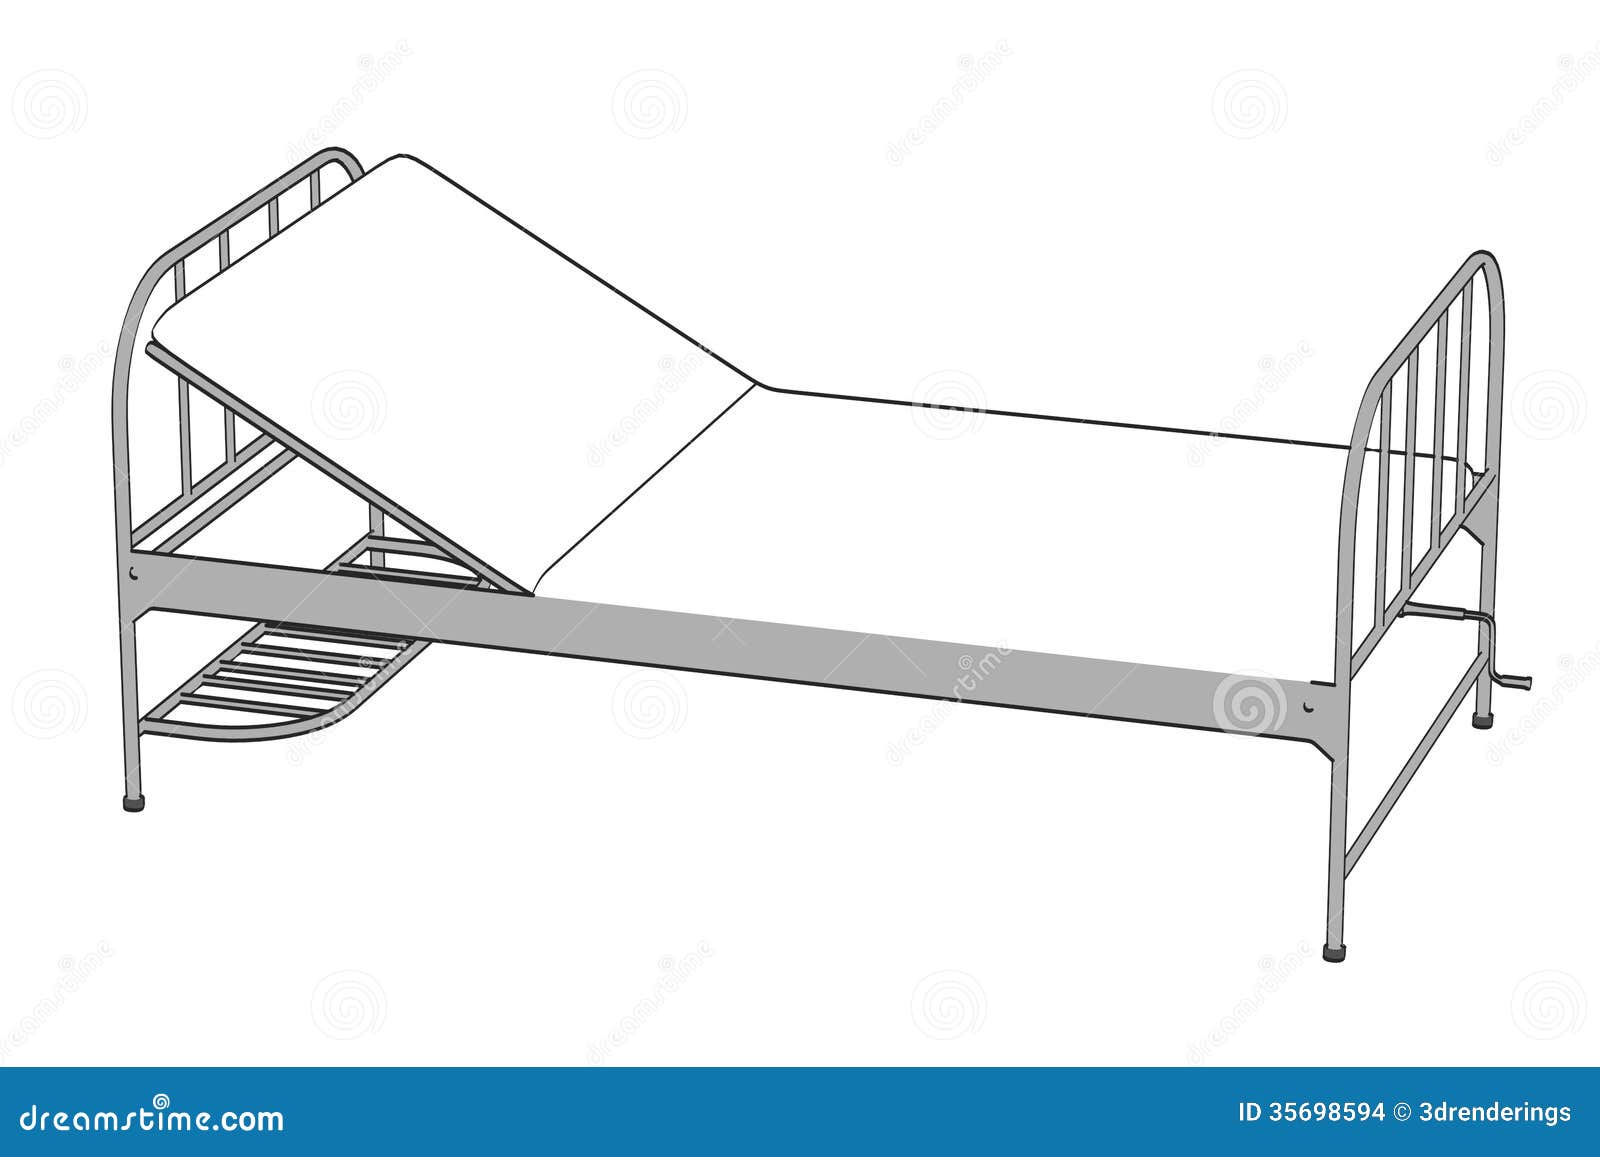 Image Of Hospital Bed Stock Images - Image: 35698594